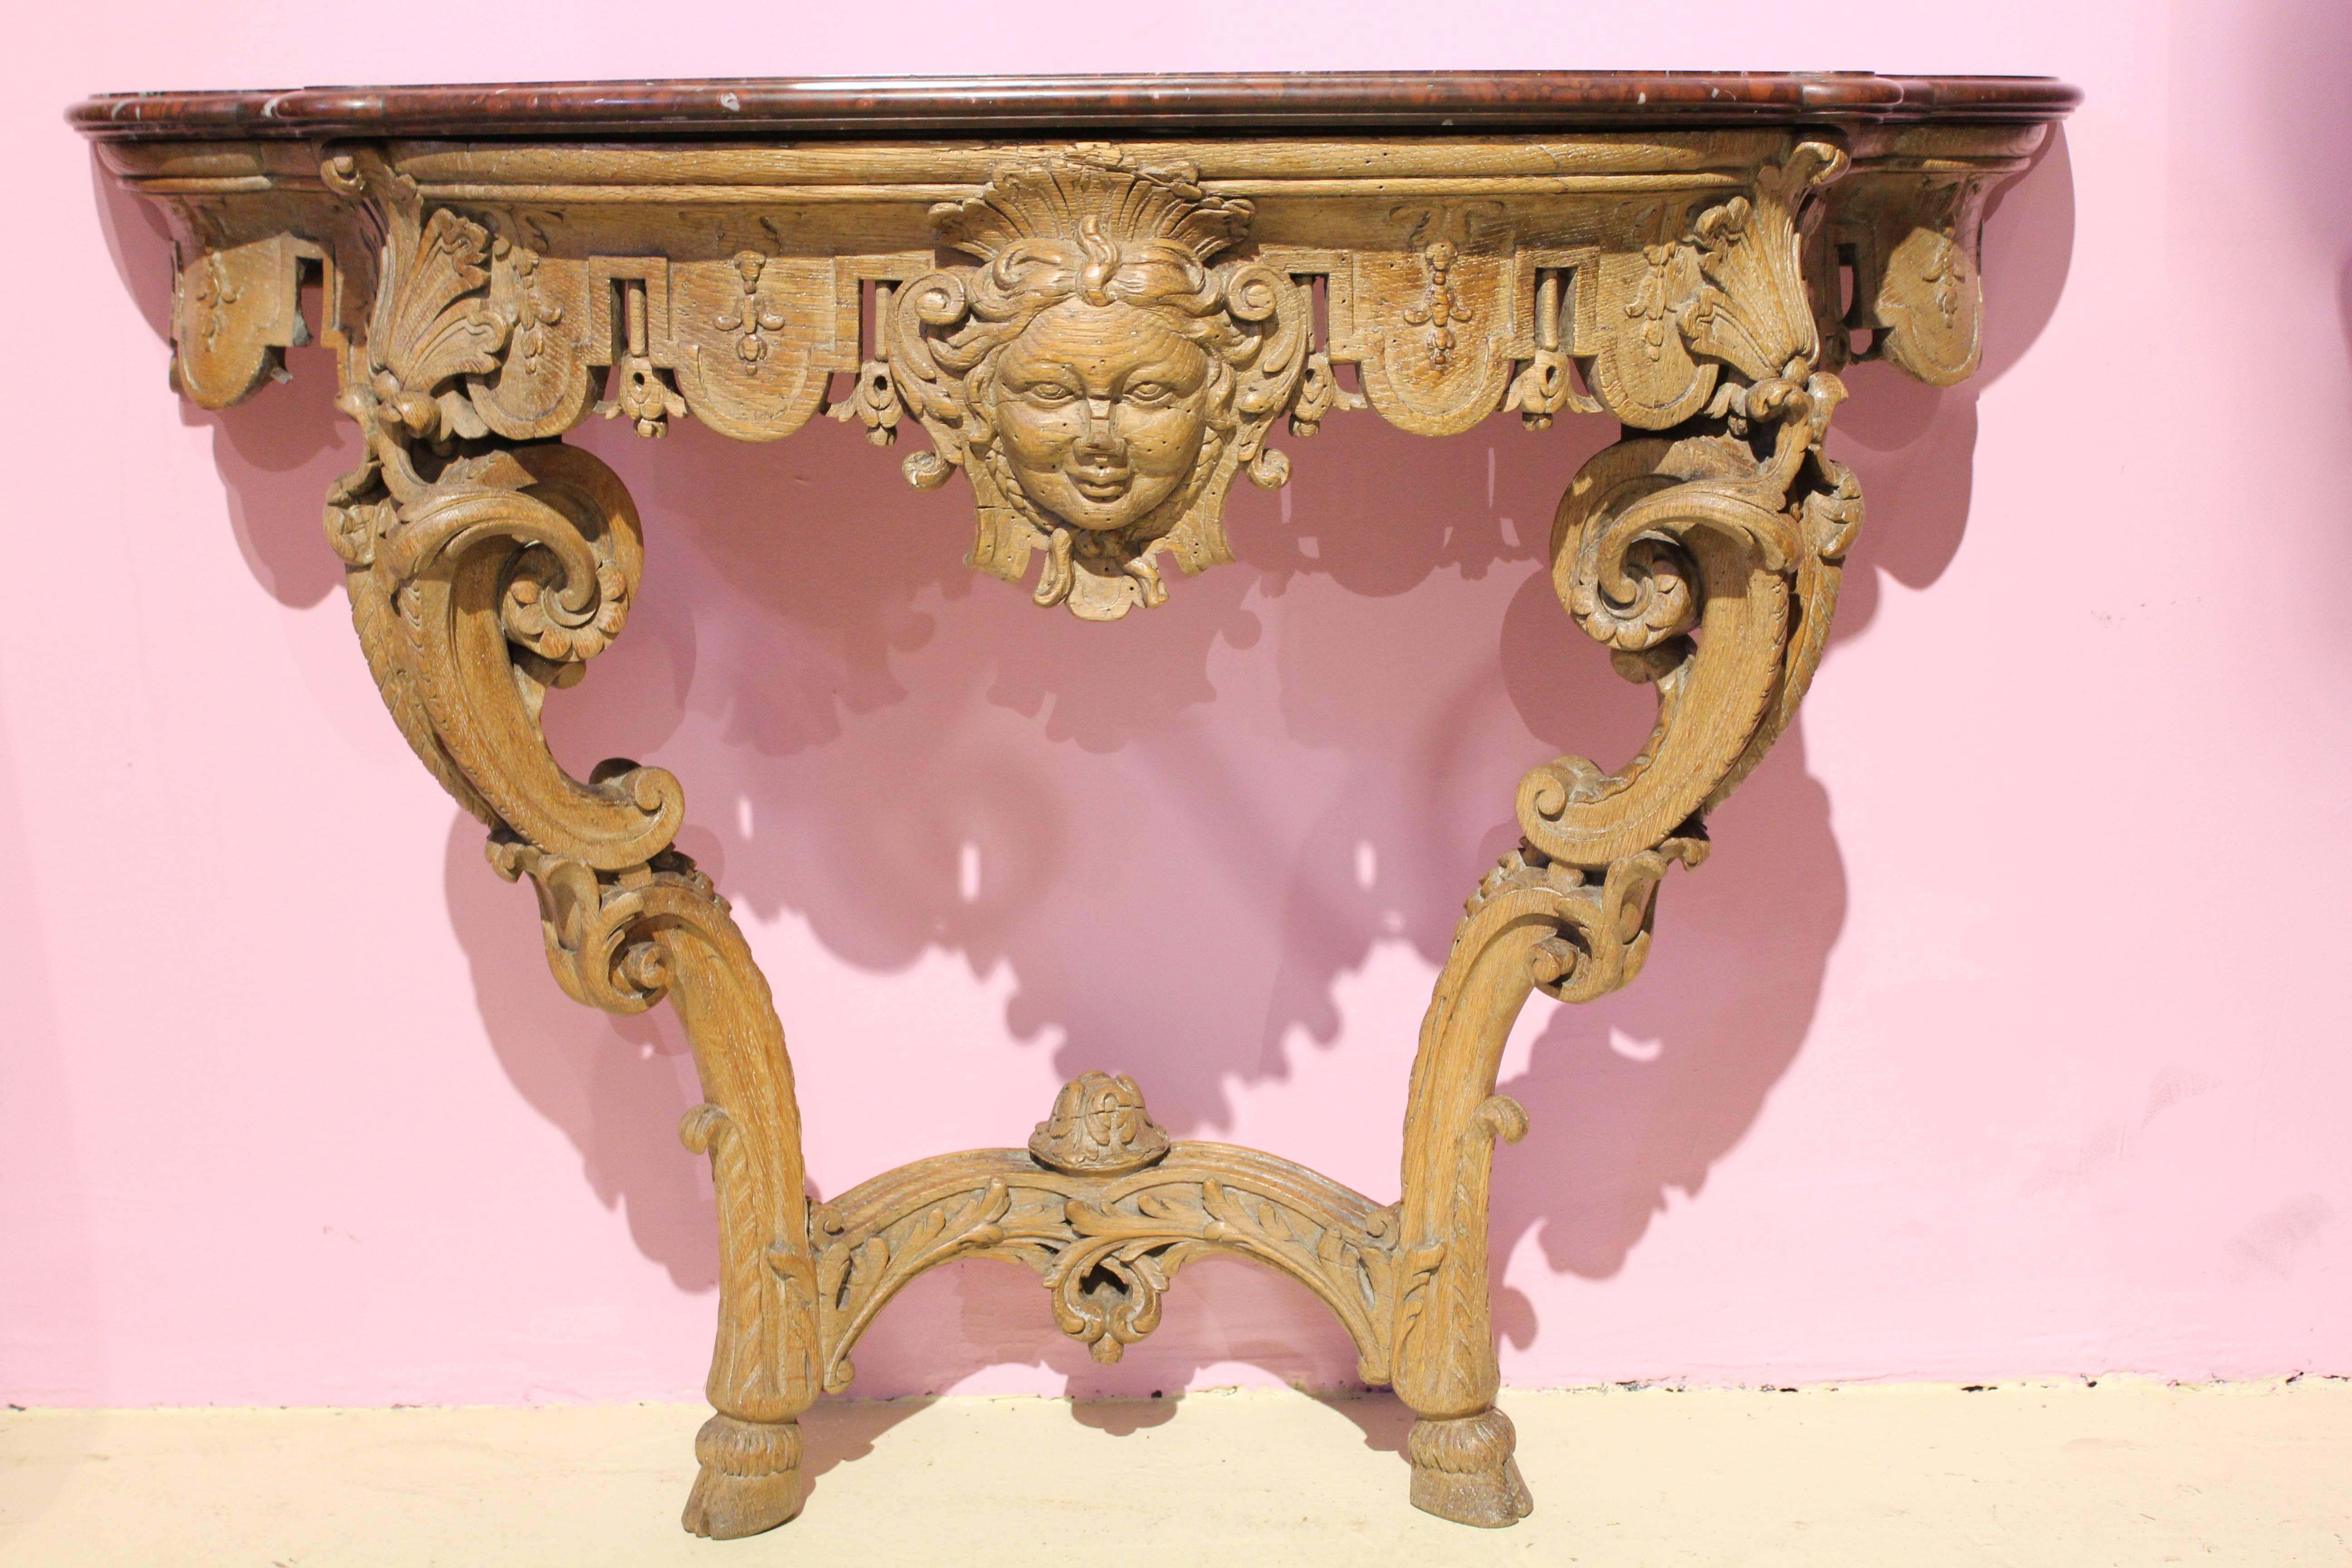 Console
Regency period, 18th Century
France
Oak and Marble

This beautiful console is of the Regency period in France, during the first part of the 18th century.
The wood (oak) is sculpted in the most beautiful way, using the stylistic codes